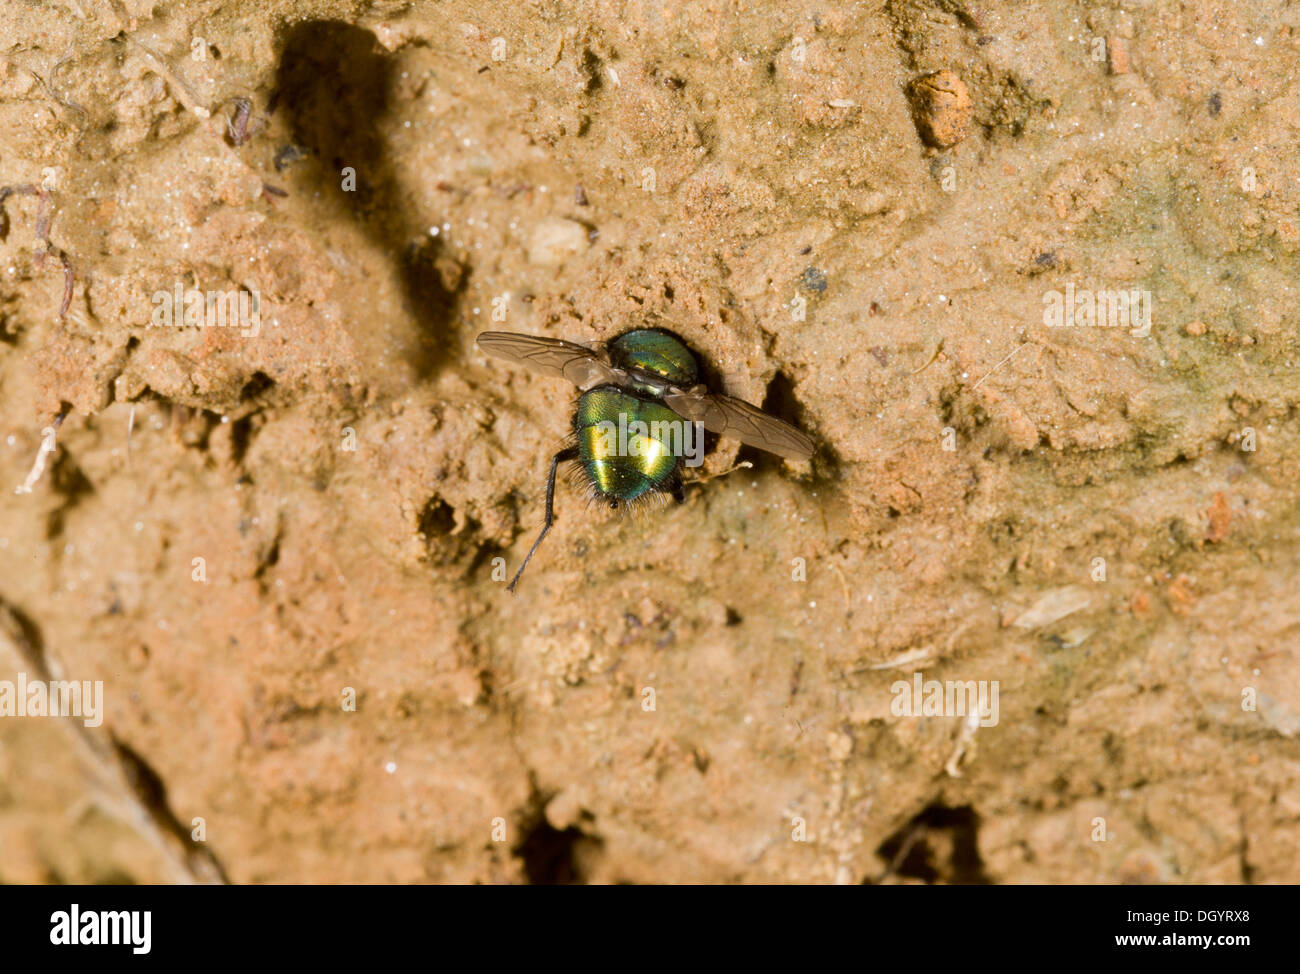 Greenbottle fly caught by larva of Coastal Tiger Beetle, Cliffs, West Dorset. Stock Photo